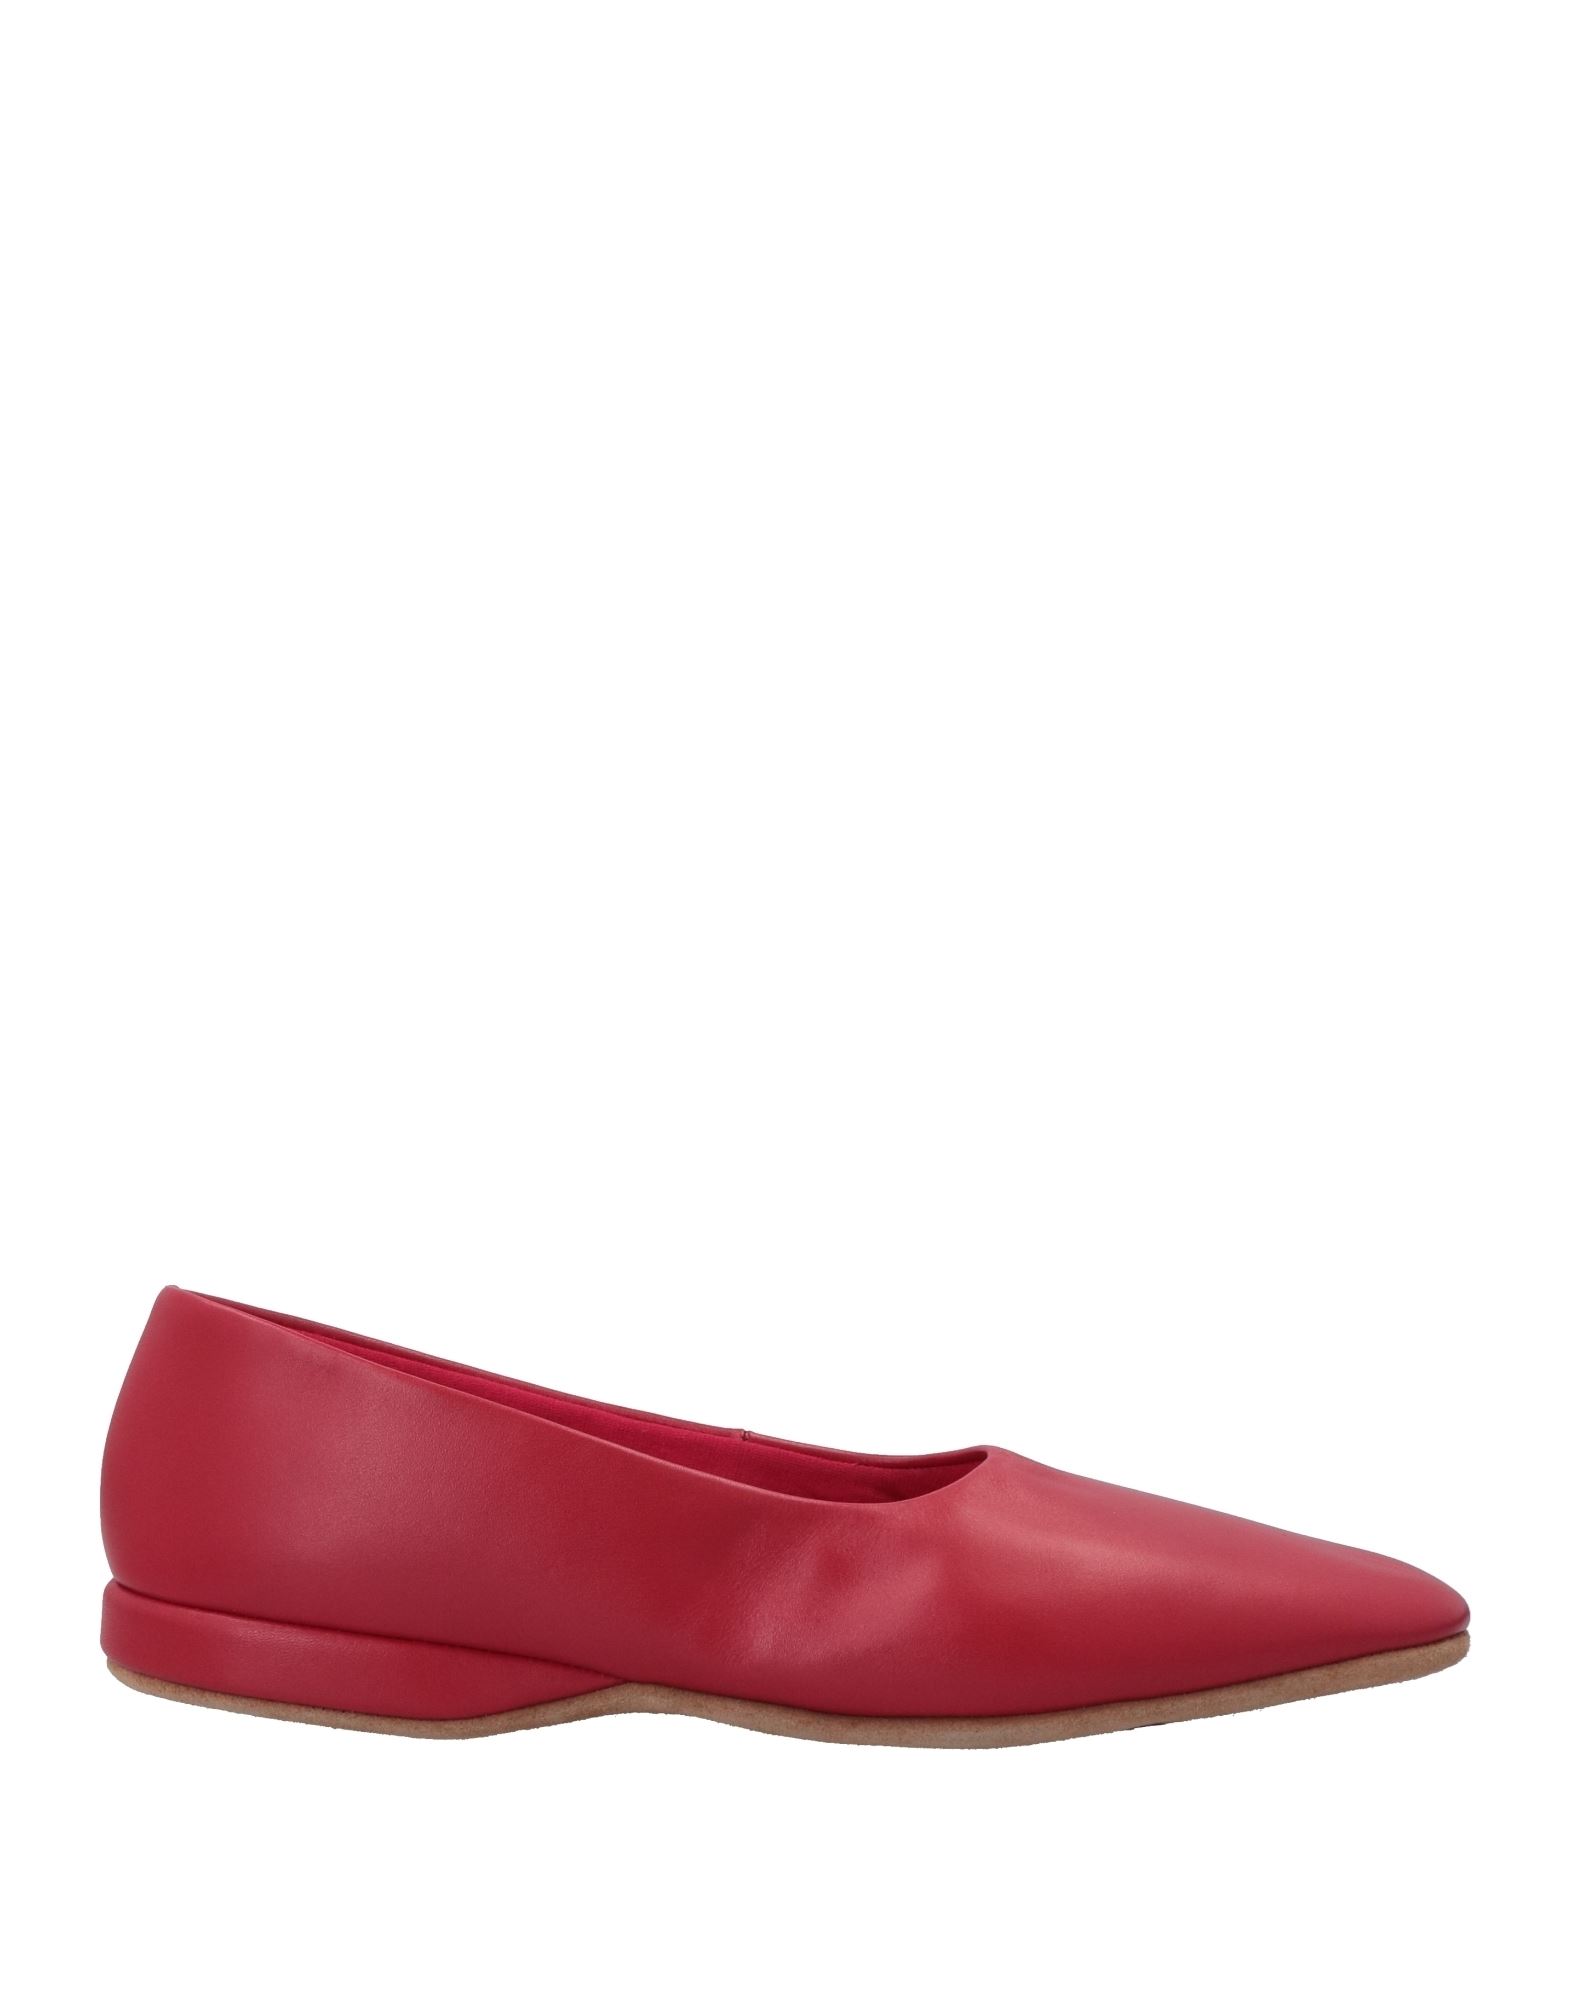 Church's Woman Ballet Flats Red Size 12 Soft Leather